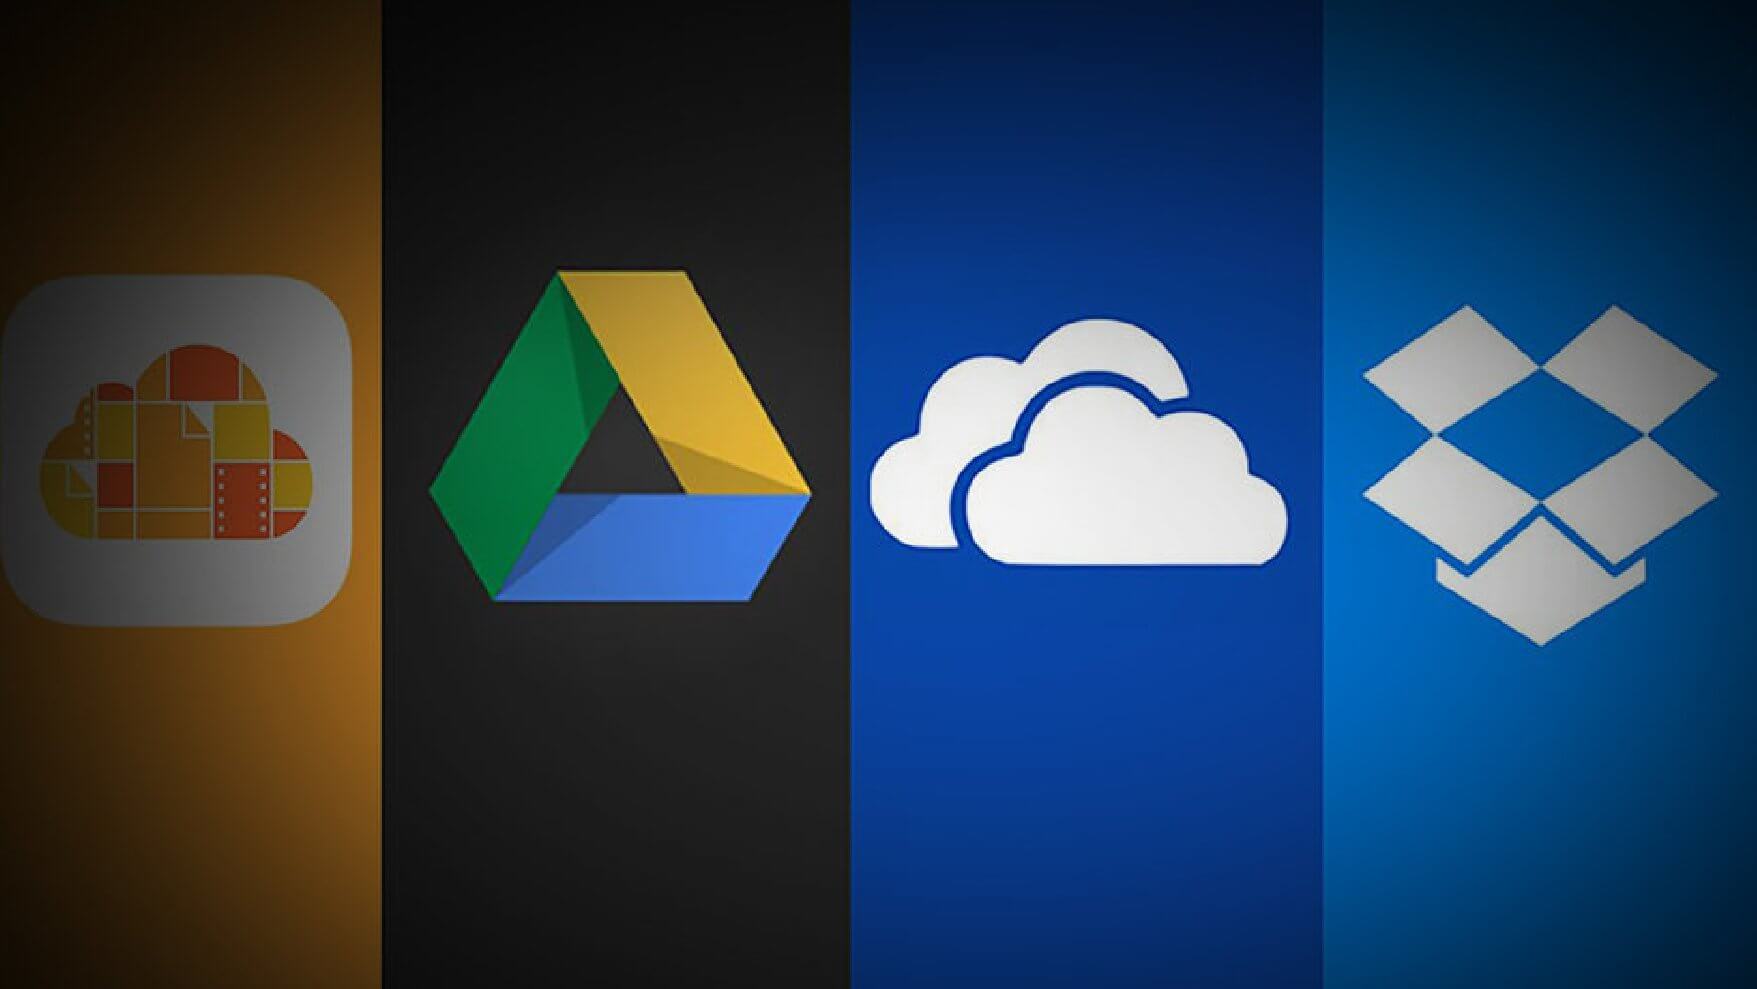 How to move your files from Dropbox, Google Drive, or OneDrive to iCloud Drive on a Mac